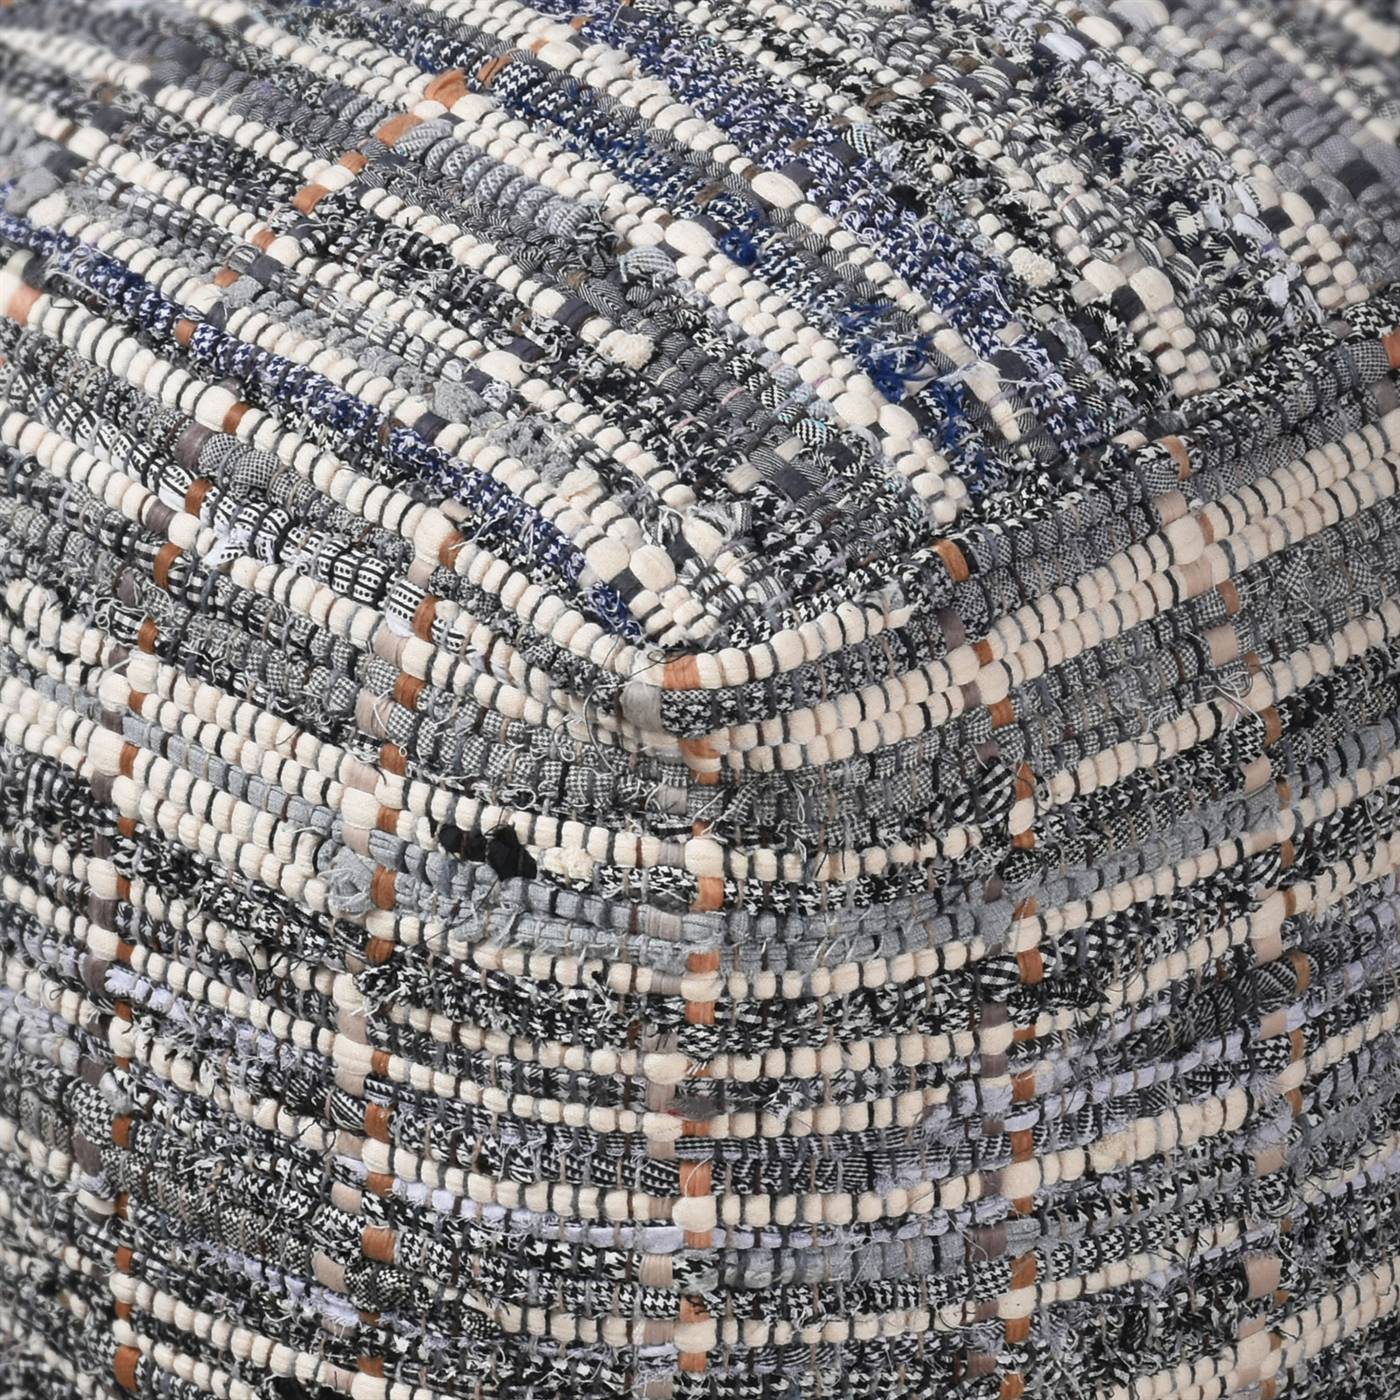 Kherson Pouf, 40x40x40 cm, Natural White, Blue, Charcoal, Cotton, Recycled Fabric, Hand Woven, Pitloom, Flat Weave